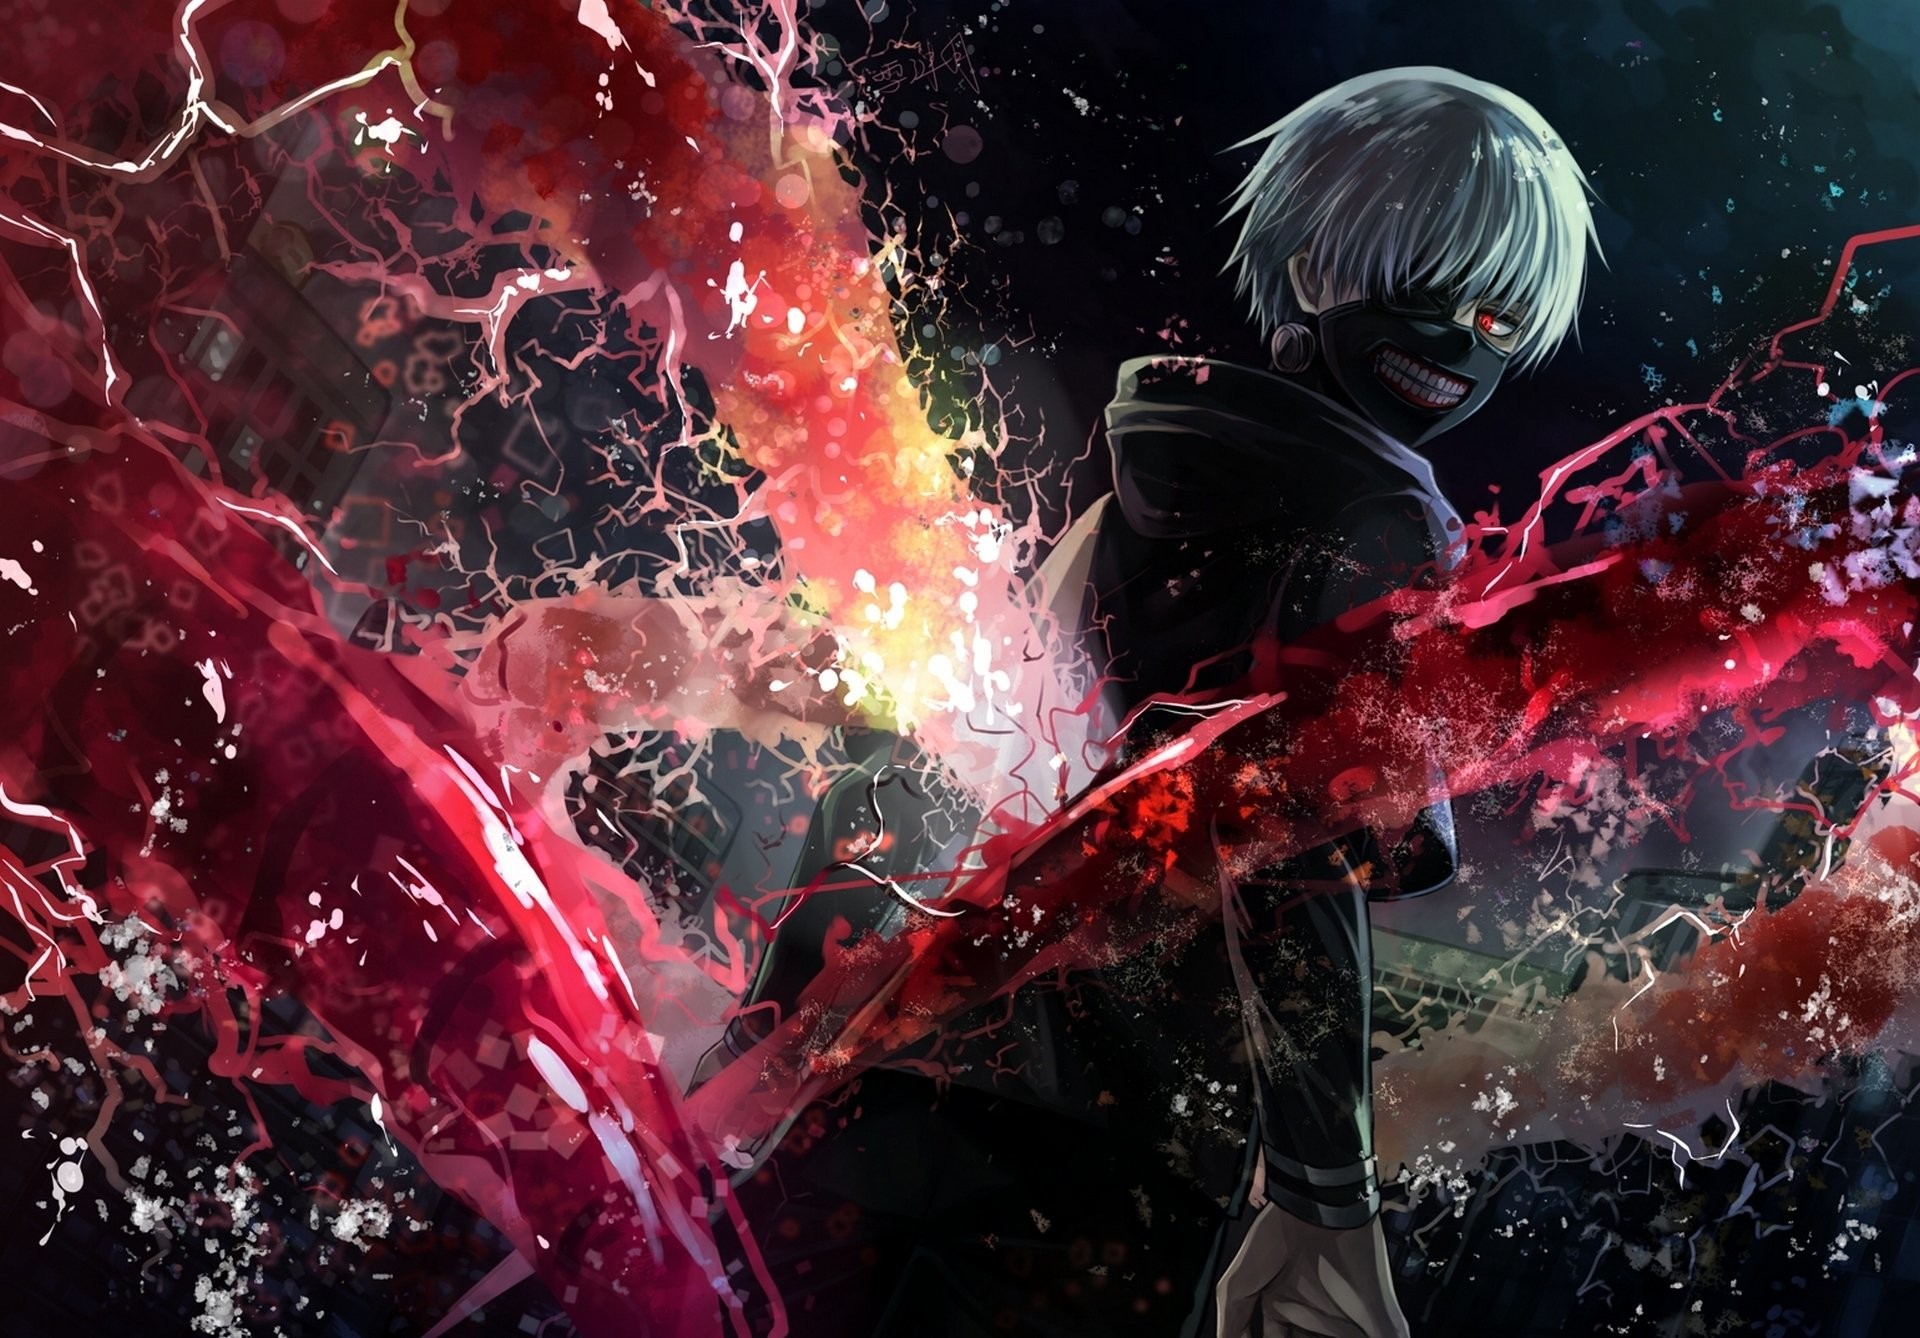 Tokyo Ghoul Android 4k Wallpapers - Wallpaper Cave